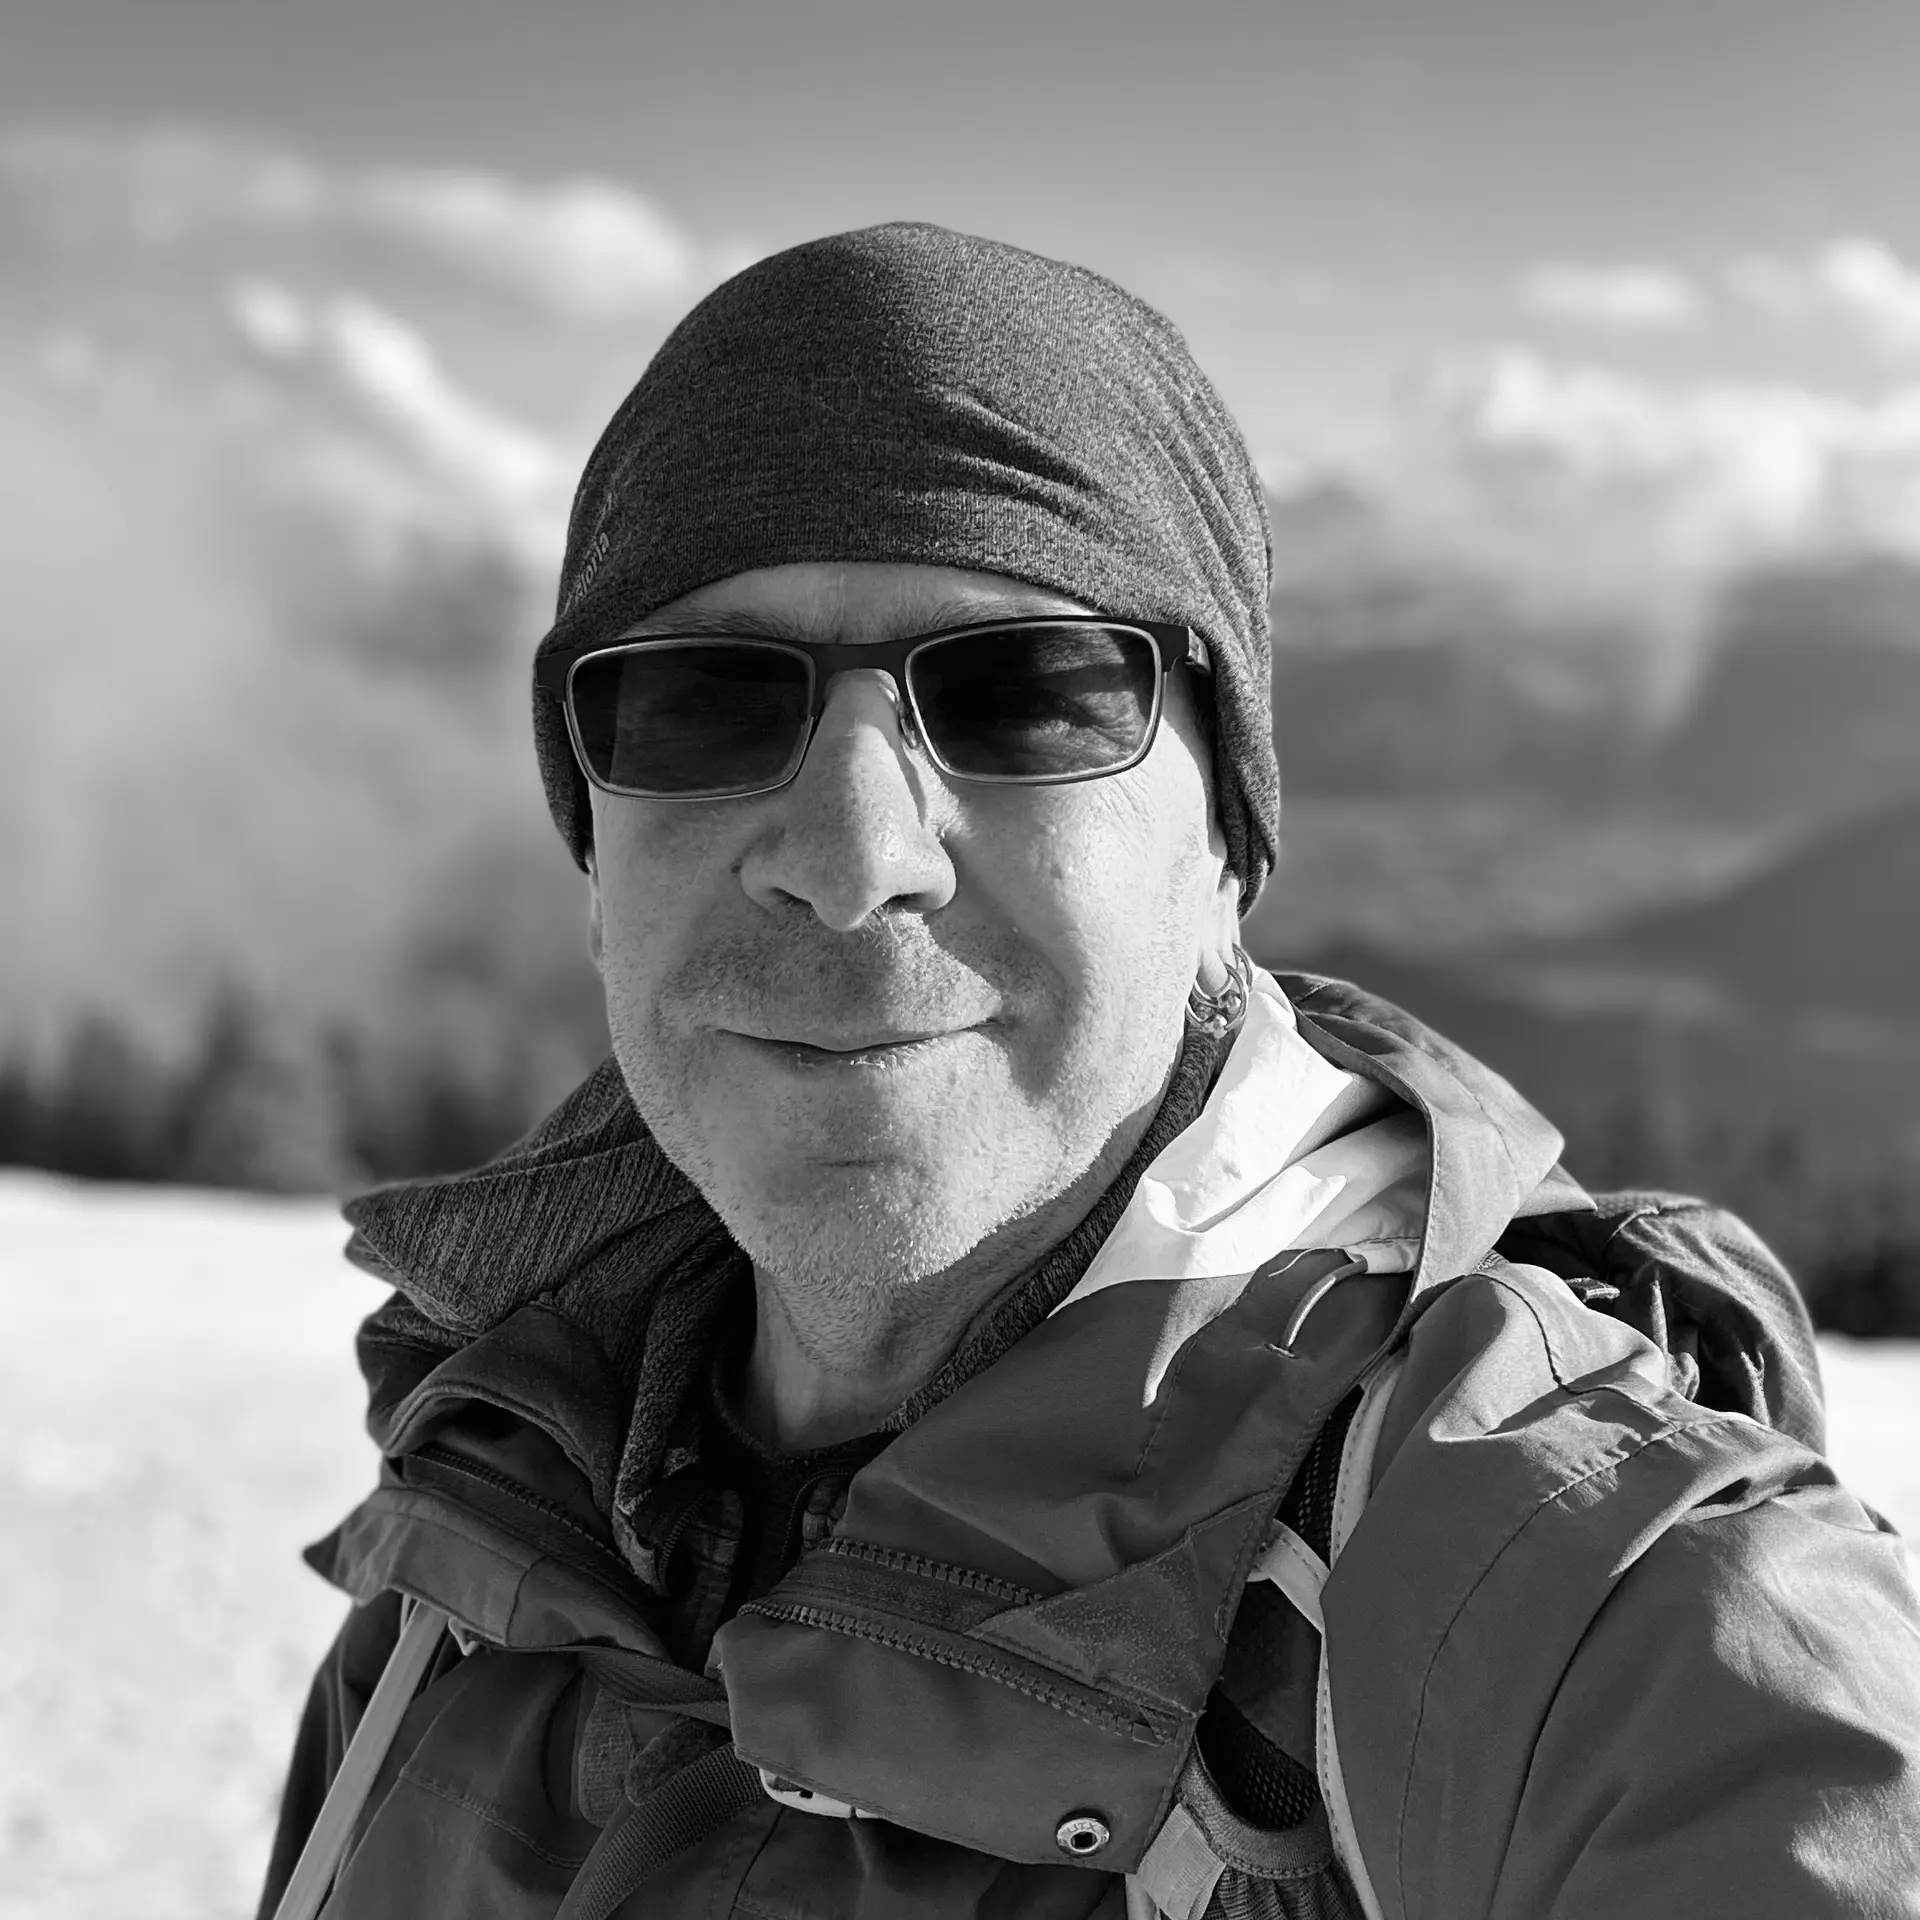 Black and white headshot photo of me, a middle-aged white man wearing sunglasses, against a blurred backdrop of mountains. Taken on top of the Wildspitz on the border between Cantons Zug and Schwyz, Switzerland.